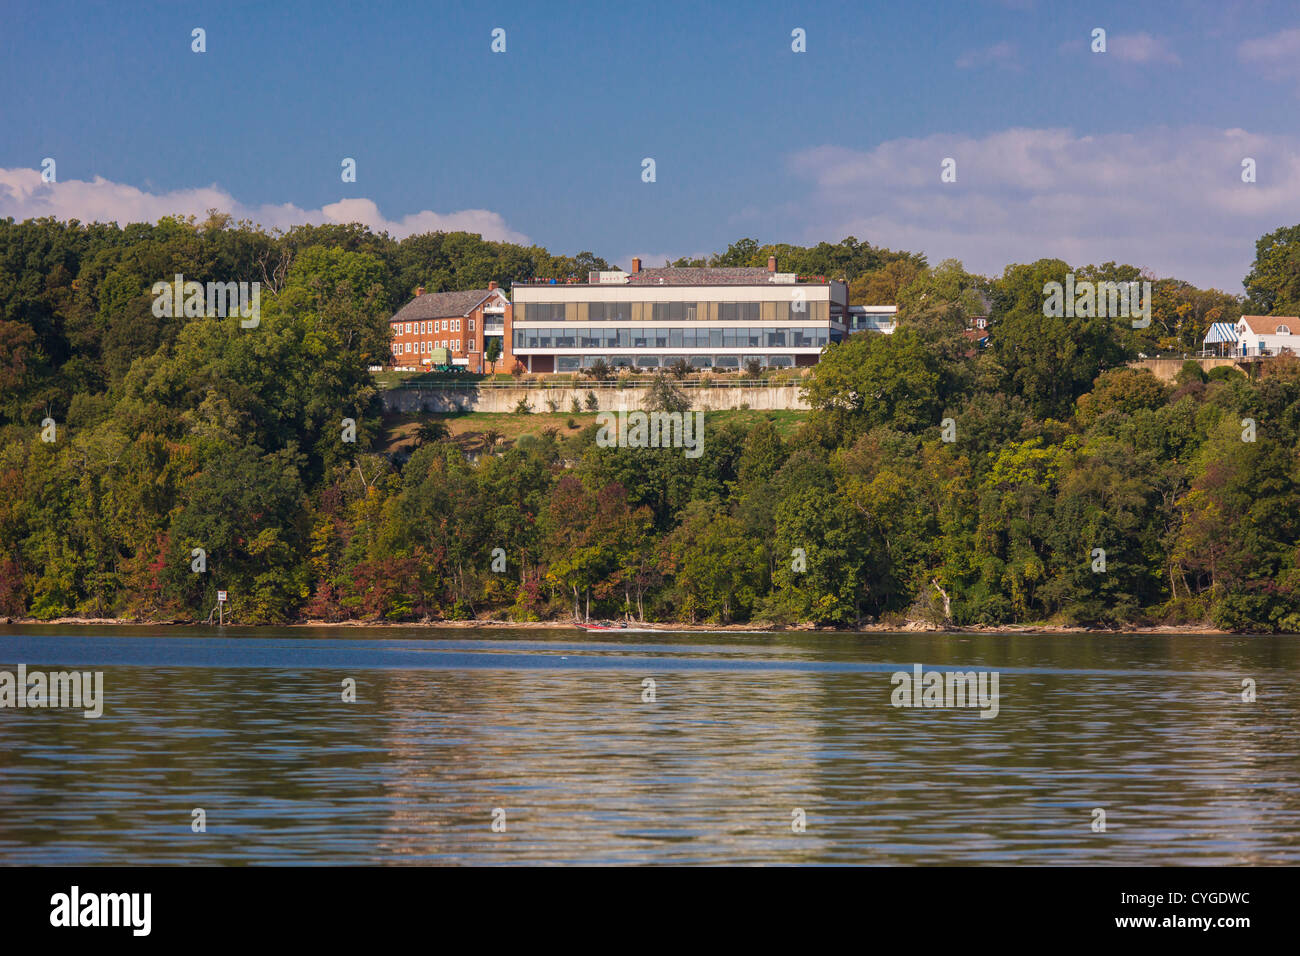 FORT BELVOIR, VIRGINIA, USA - Fort Belvoir Officers' Club on the Potomac River. Stock Photo